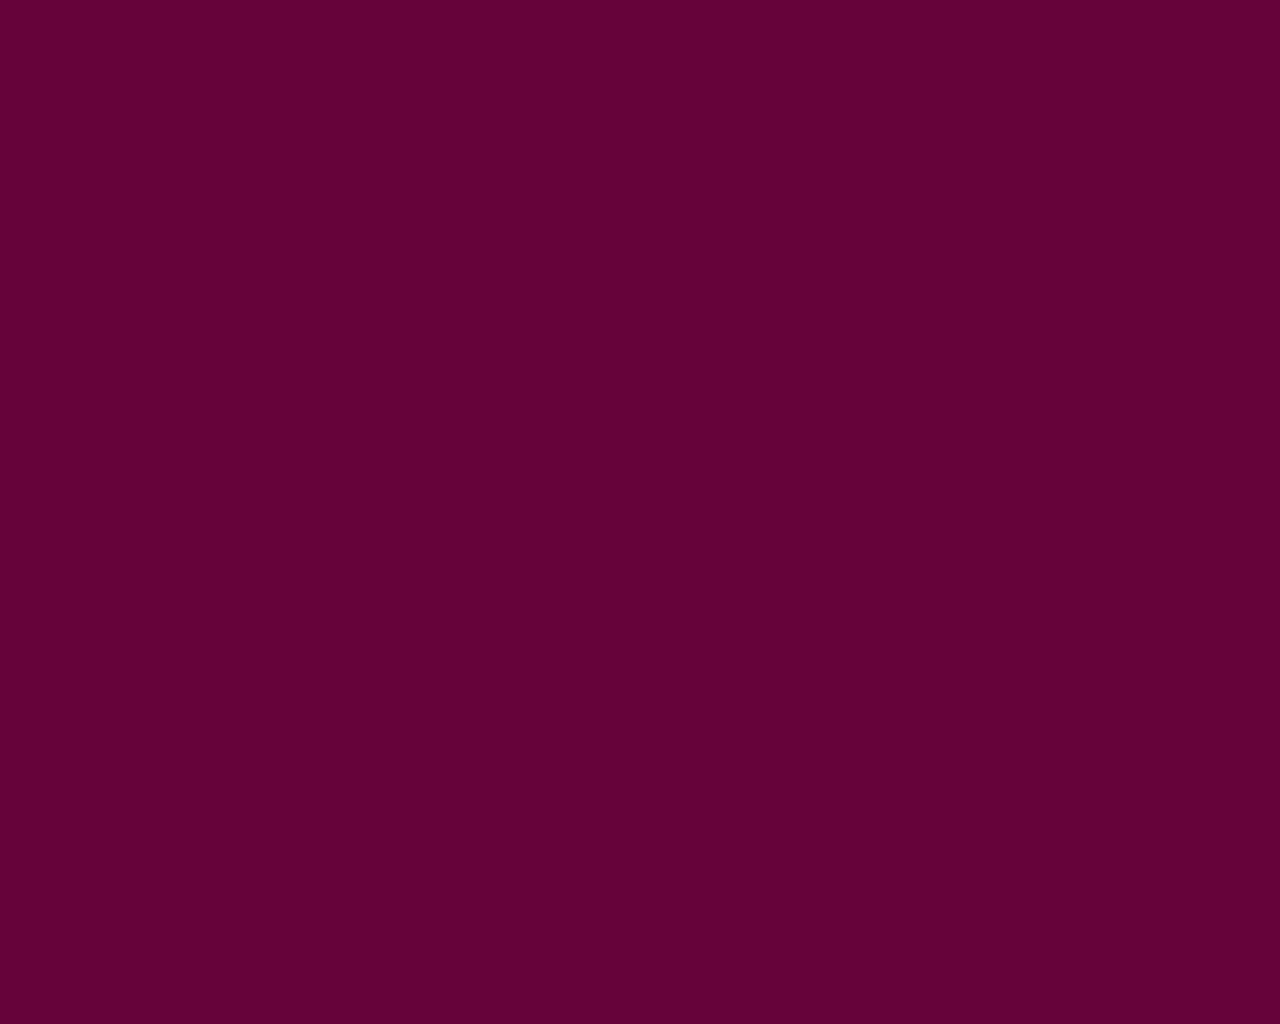 1280x1024 Imperial Purple Solid Color Background